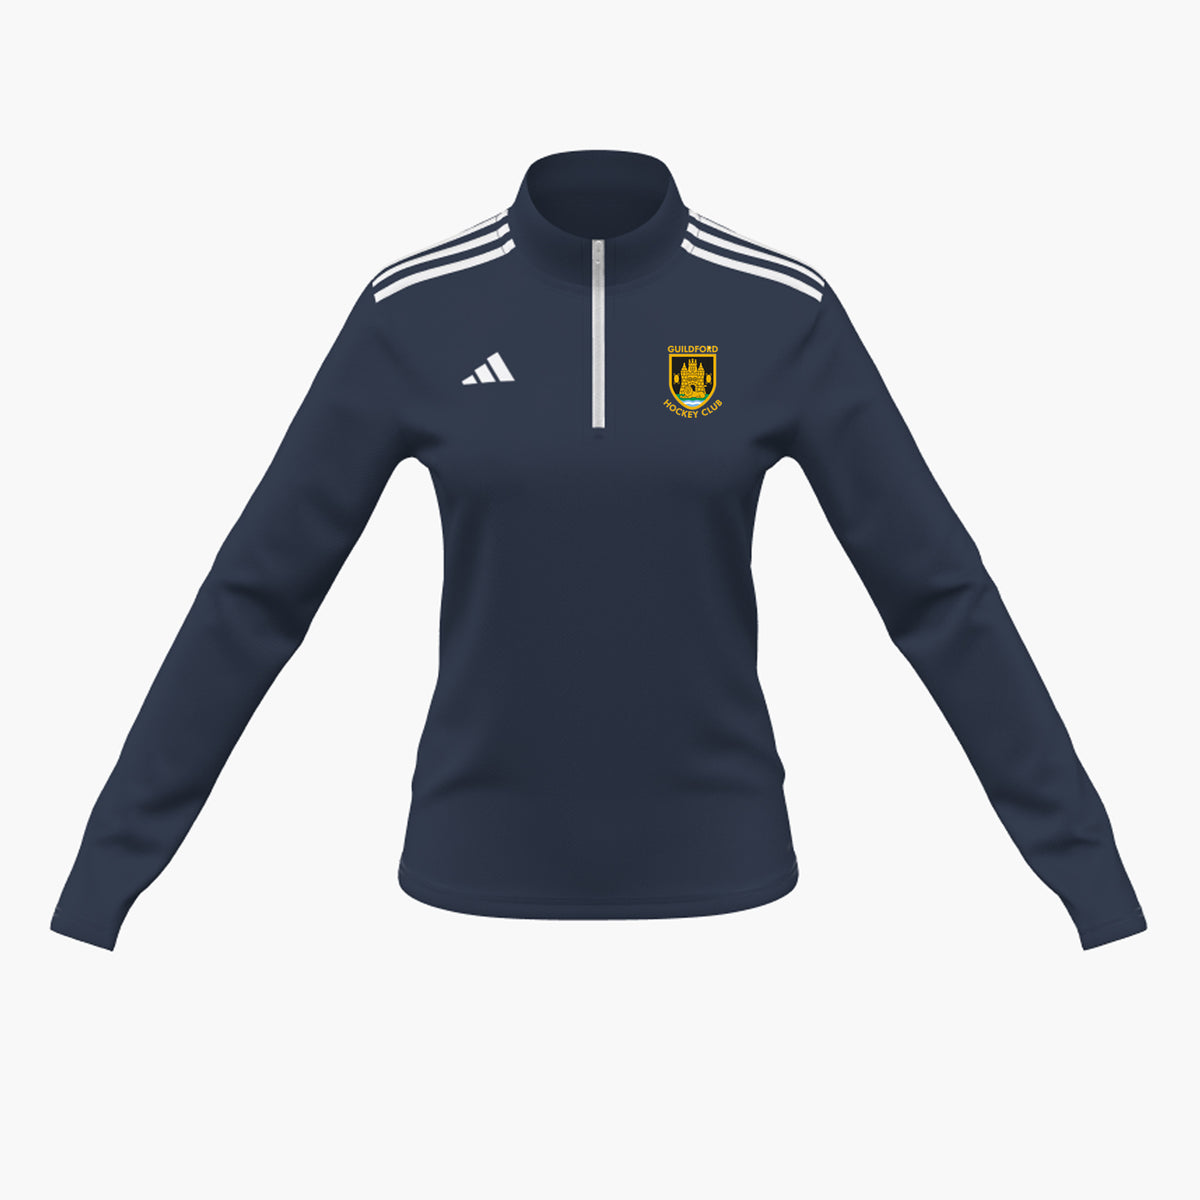 Guildford HC Women's Training Top